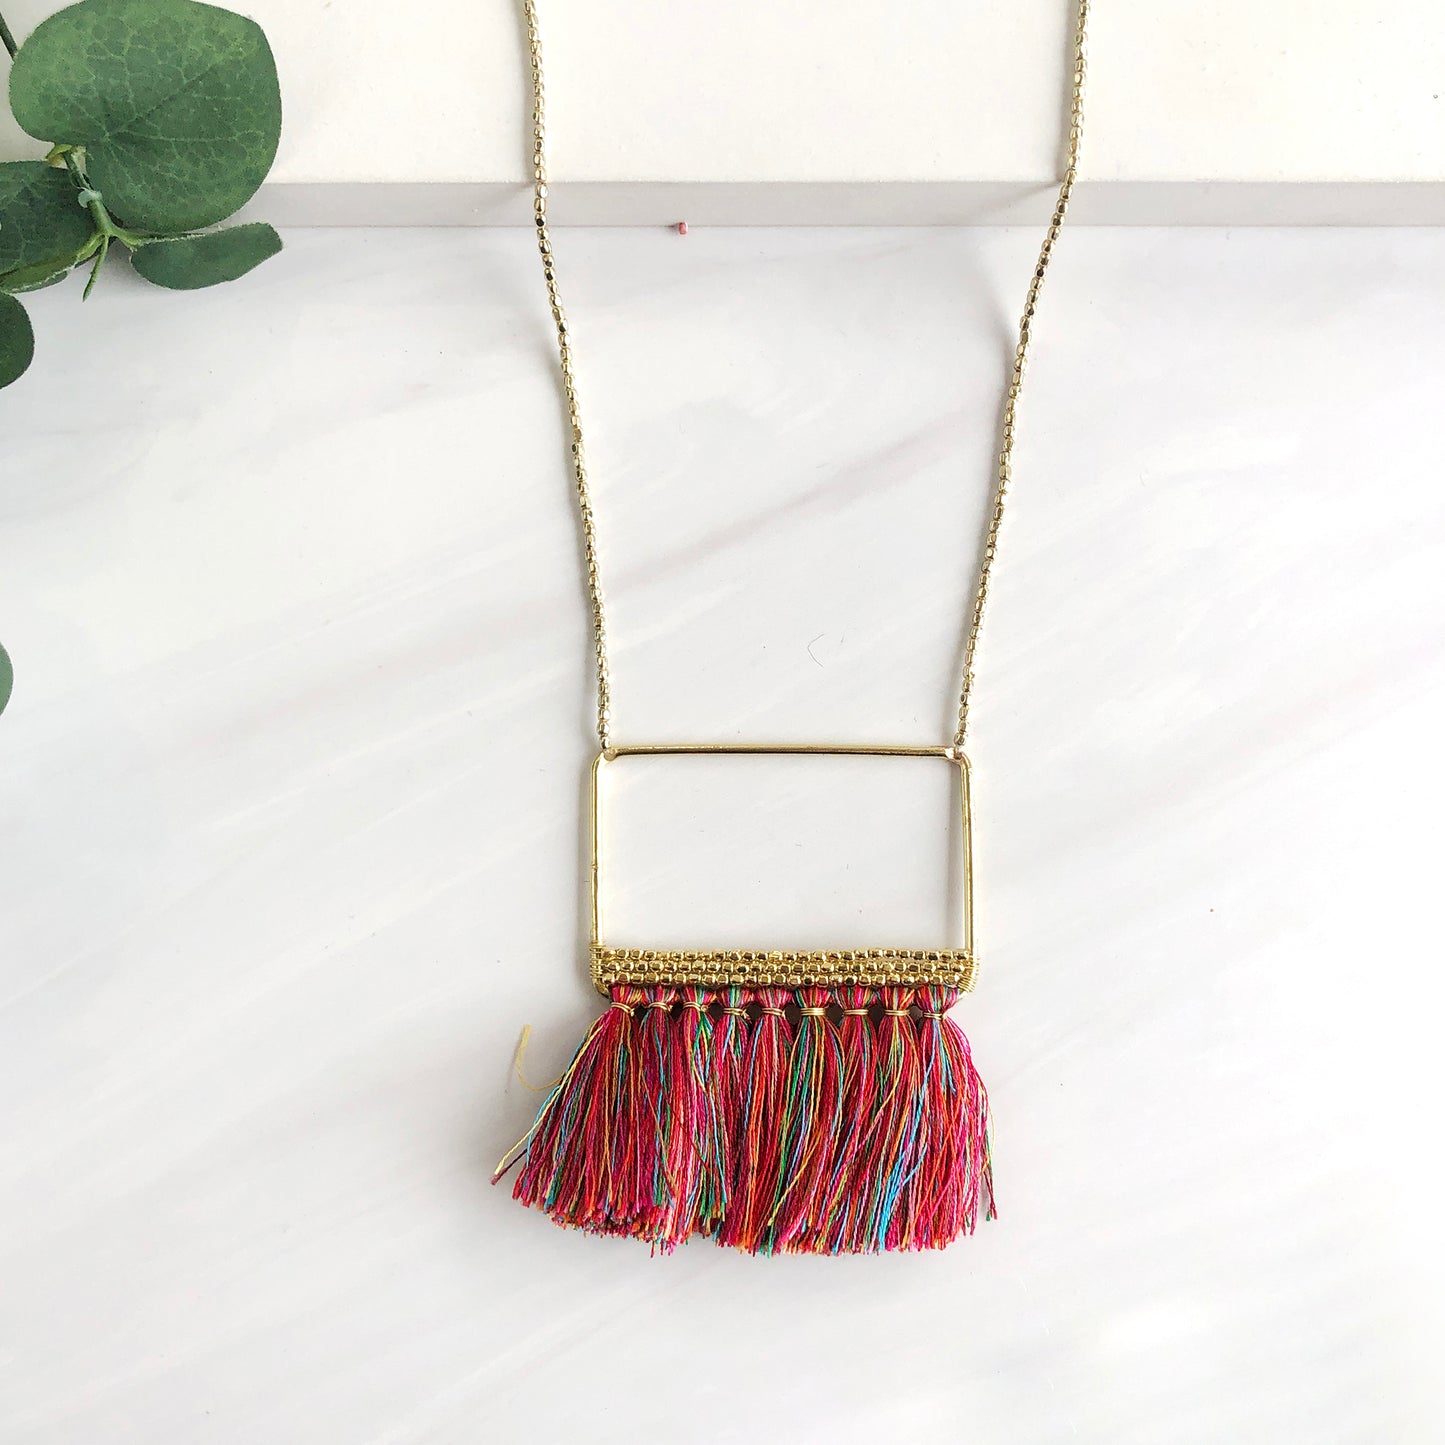 A close up of the tassels on a necklace.